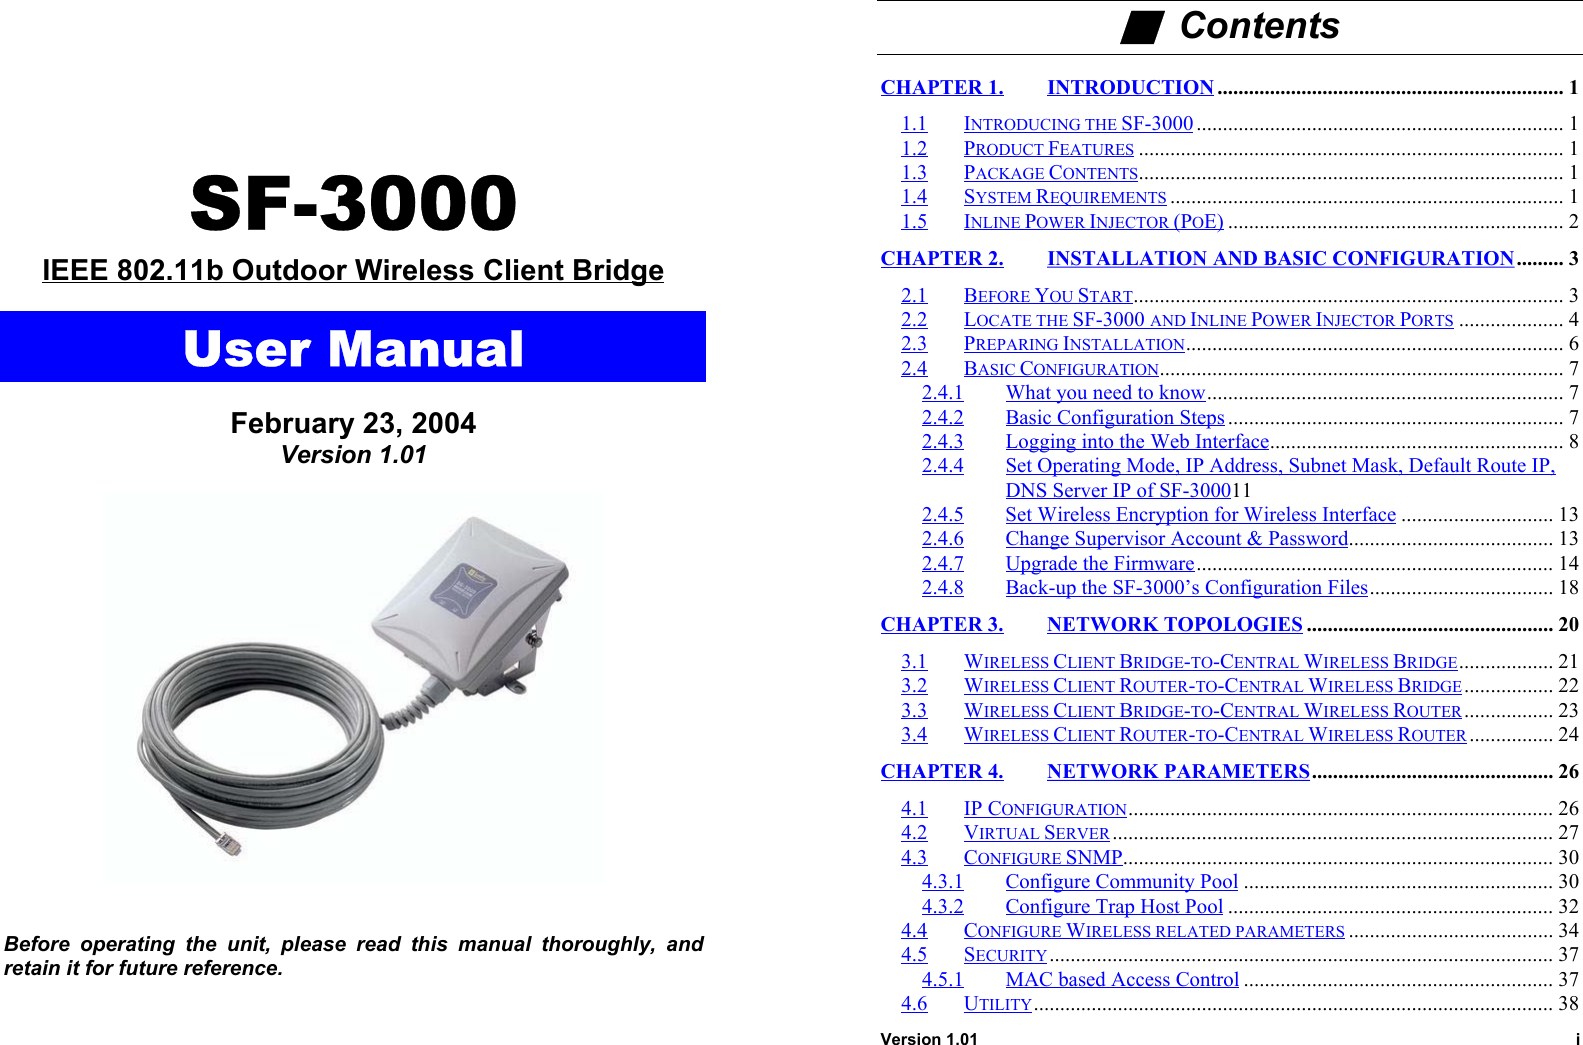 SF-3000IEEE 802.11b Outdoor Wireless Client BridgeUser ManualFebruary 23, 2004Version 1.01Before operating the unit, please read this manual thoroughly, andretain it for future reference.Version 1.01 i■  ContentsCHAPTER 1. INTRODUCTION .................................................................. 11.1 INTRODUCING THE SF-3000 ...................................................................... 11.2 PRODUCT FEATURES ................................................................................. 11.3 PACKAGE CONTENTS................................................................................. 11.4 SYSTEM REQUIREMENTS ........................................................................... 11.5 INLINE POWER INJECTOR (POE) ................................................................ 2CHAPTER 2. INSTALLATION AND BASIC CONFIGURATION ......... 32.1 BEFORE YOU START.................................................................................. 32.2 LOCATE THE SF-3000 AND INLINE POWER INJECTOR PORTS .................... 42.3 PREPARING INSTALLATION........................................................................ 62.4 BASIC CONFIGURATION............................................................................. 72.4.1 What you need to know.................................................................... 72.4.2 Basic Configuration Steps ................................................................ 72.4.3 Logging into the Web Interface........................................................ 82.4.4 Set Operating Mode, IP Address, Subnet Mask, Default Route IP,DNS Server IP of SF-3000112.4.5 Set Wireless Encryption for Wireless Interface ............................. 132.4.6 Change Supervisor Account &amp; Password....................................... 132.4.7 Upgrade the Firmware.................................................................... 142.4.8 Back-up the SF-3000’s Configuration Files................................... 18CHAPTER 3. NETWORK TOPOLOGIES ............................................... 203.1 WIRELESS CLIENT BRIDGE-TO-CENTRAL WIRELESS BRIDGE.................. 213.2 WIRELESS CLIENT ROUTER-TO-CENTRAL WIRELESS BRIDGE................. 223.3 WIRELESS CLIENT BRIDGE-TO-CENTRAL WIRELESS ROUTER ................. 233.4 WIRELESS CLIENT ROUTER-TO-CENTRAL WIRELESS ROUTER ................ 24CHAPTER 4. NETWORK PARAMETERS .............................................. 264.1 IP CONFIGURATION................................................................................. 264.2 VIRTUAL SERVER .................................................................................... 274.3 CONFIGURE SNMP.................................................................................. 304.3.1 Configure Community Pool ........................................................... 304.3.2 Configure Trap Host Pool .............................................................. 324.4 CONFIGURE WIRELESS RELATED PARAMETERS ....................................... 344.5 SECURITY................................................................................................ 374.5.1 MAC based Access Control ........................................................... 374.6 UTILITY................................................................................................... 38